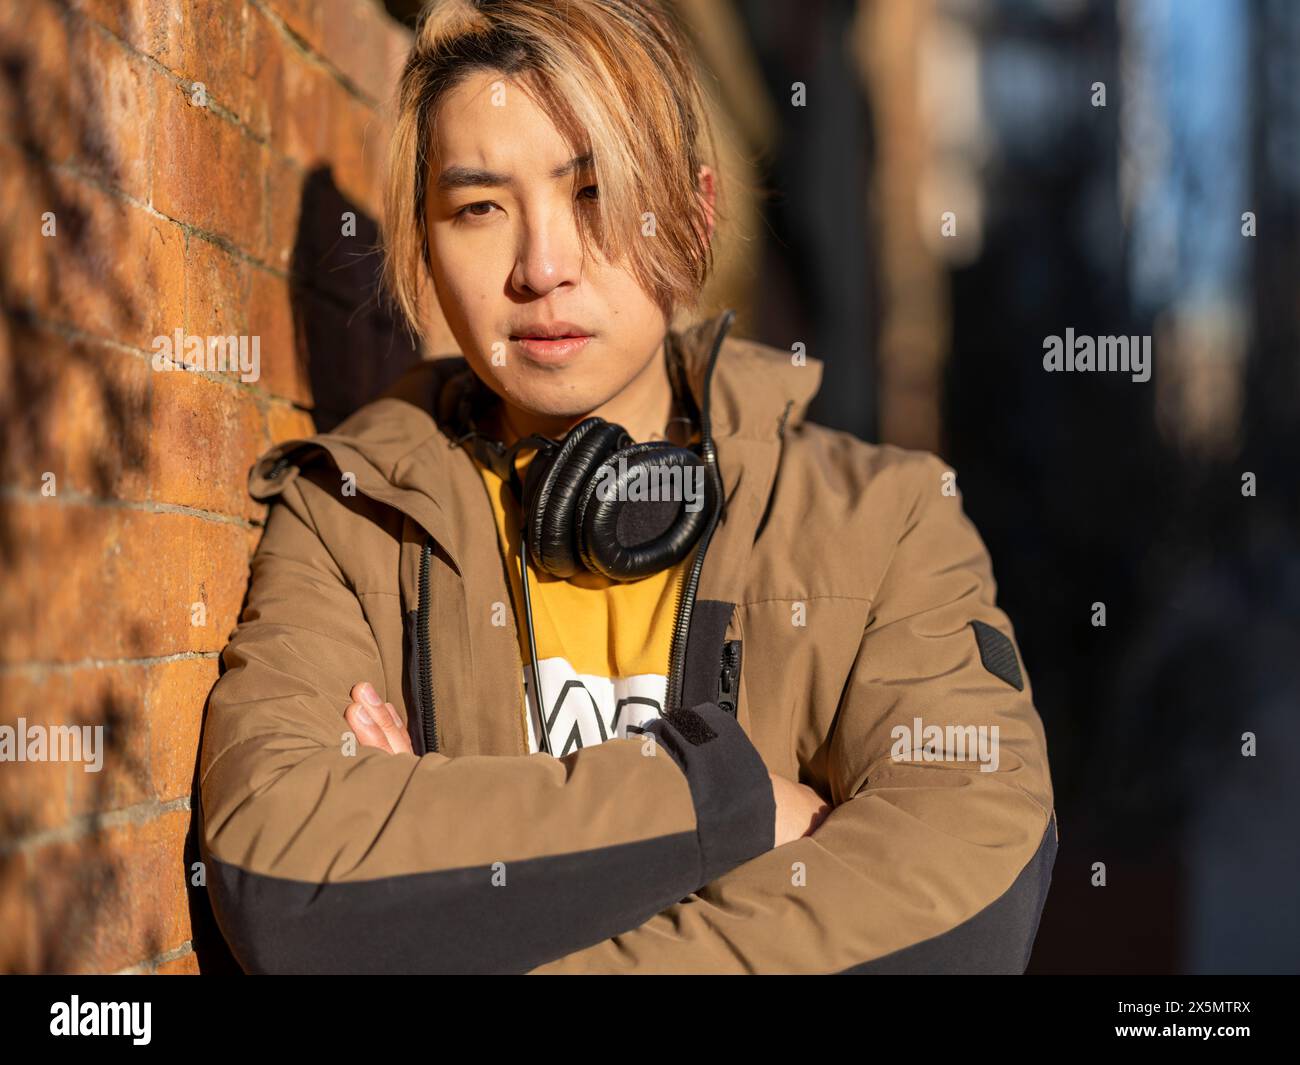 Portrait of serious man against brick wall Stock Photo